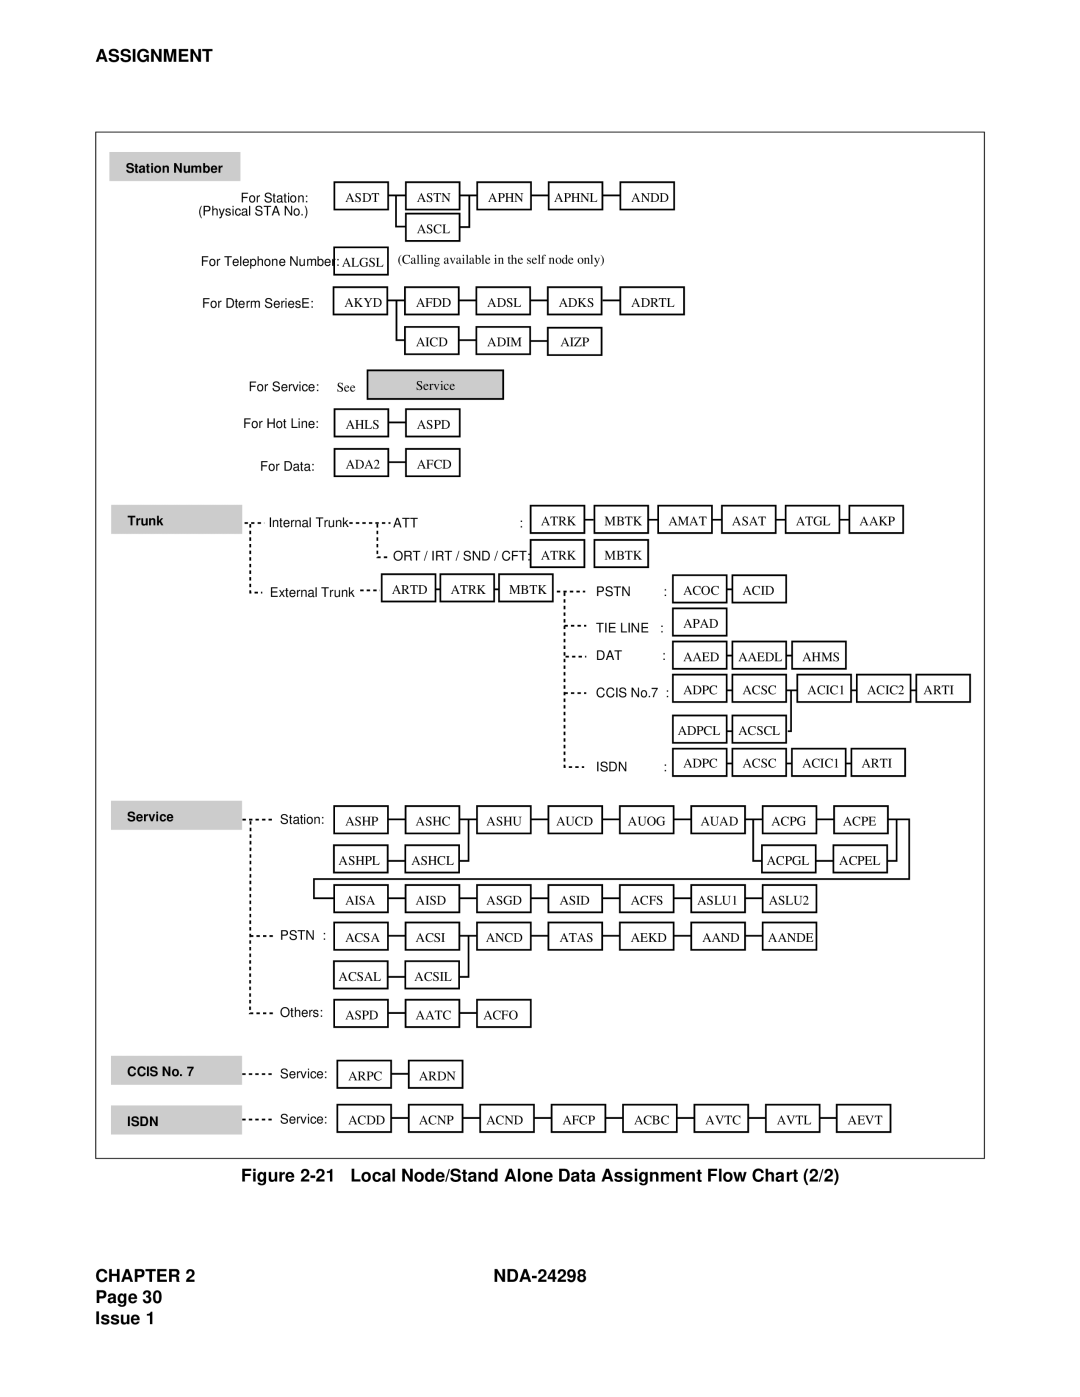 NEC NDA-24298 manual Local Node/Stand Alone Data Assignment Flow Chart 2/2 